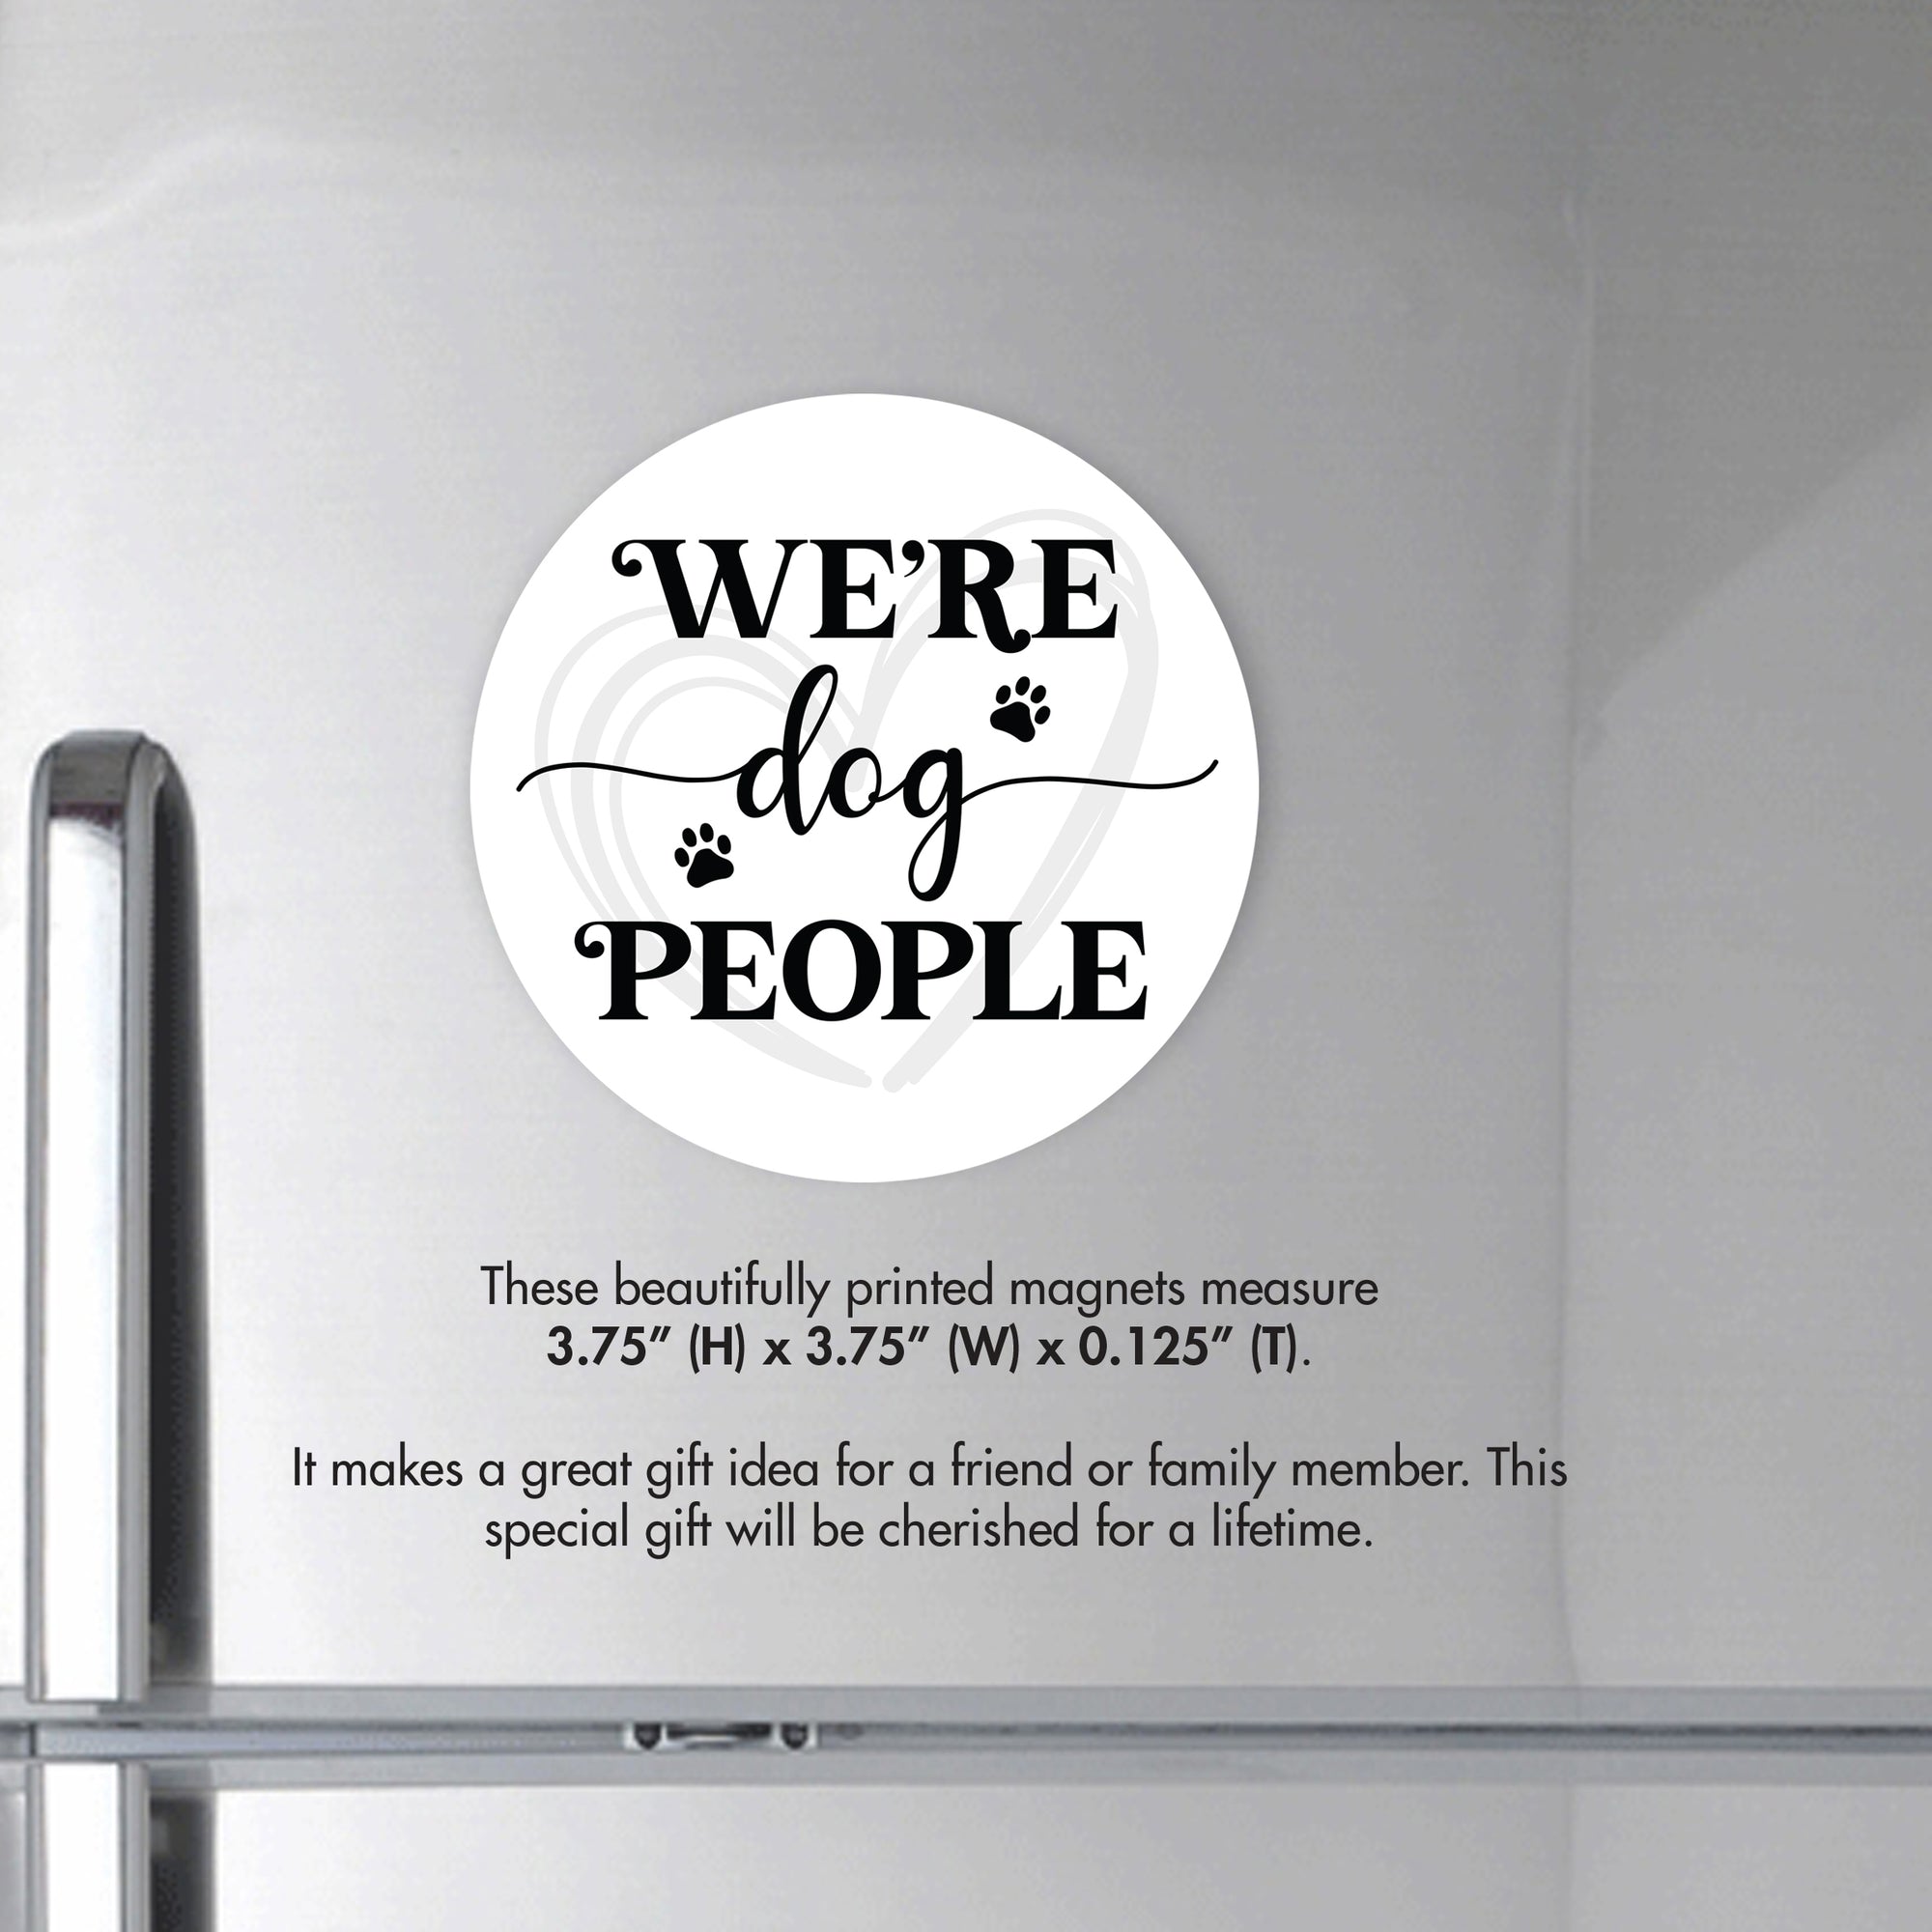 Refrigerator Magnet Perfect Gift Idea For Pet Owners - We’re Dog People